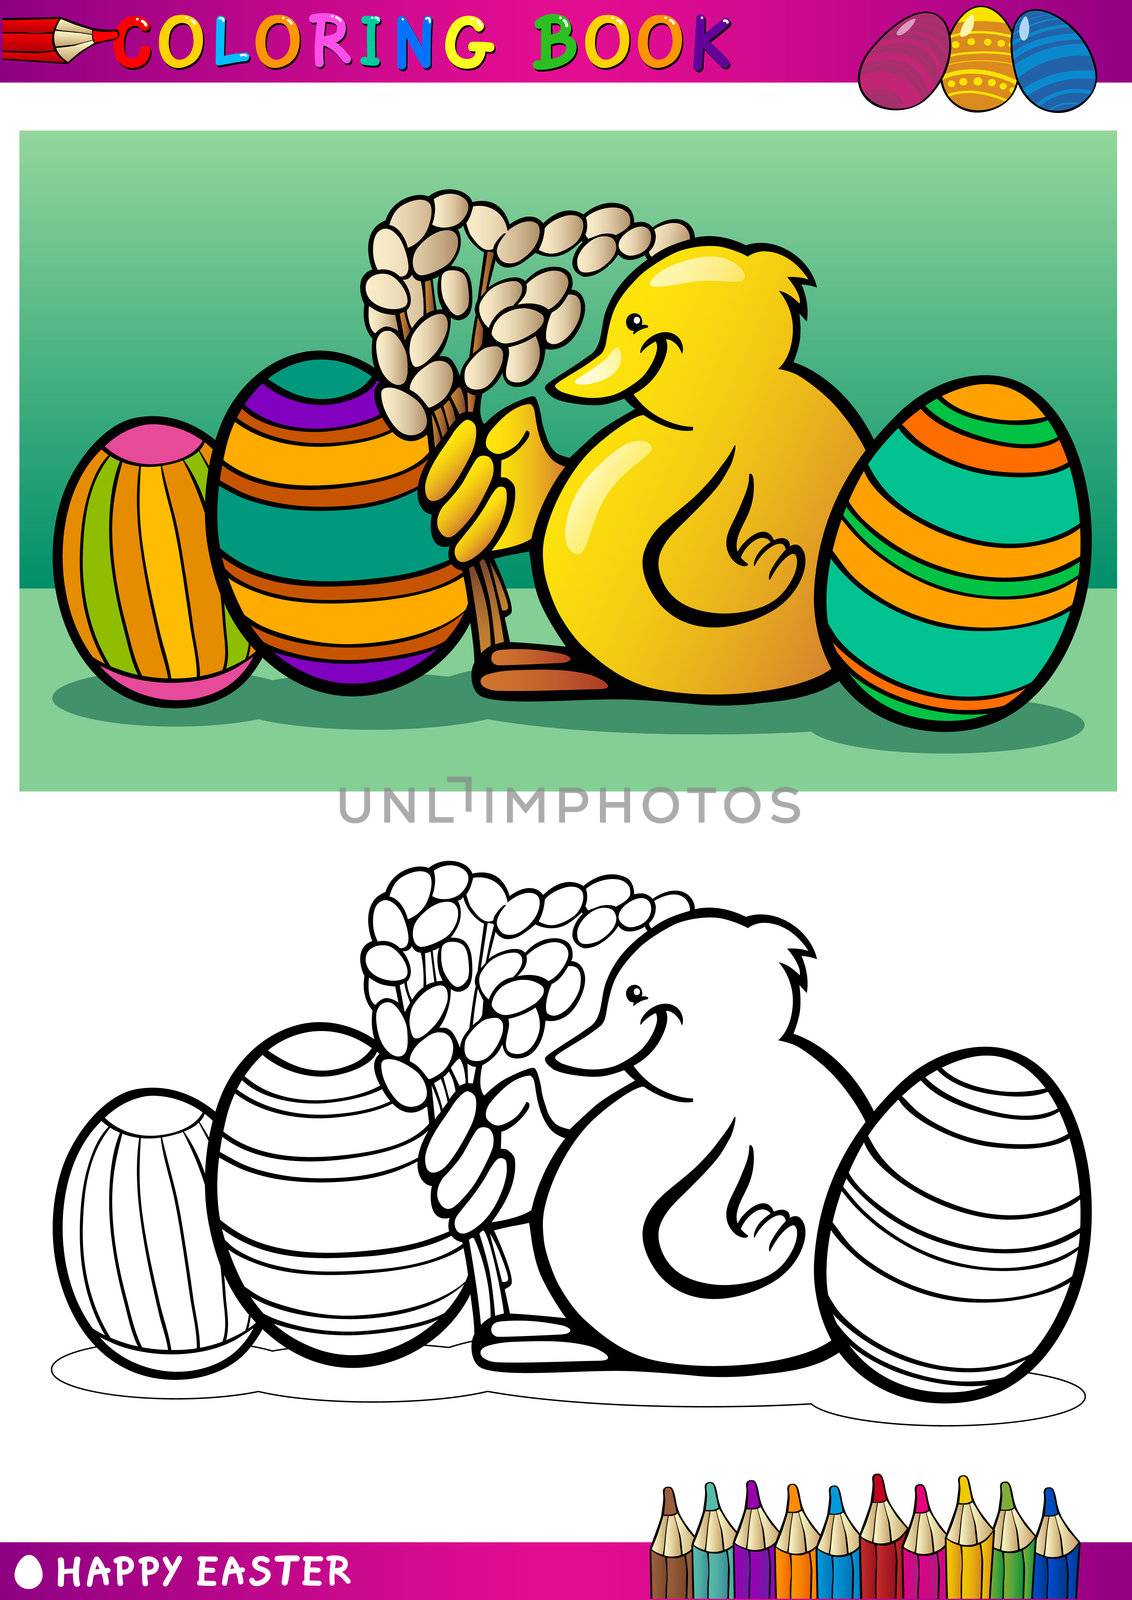 Coloring Book or Page Cartoon Illustration of Easter Little Chick or Chicken with Catkin and Painted Eggs